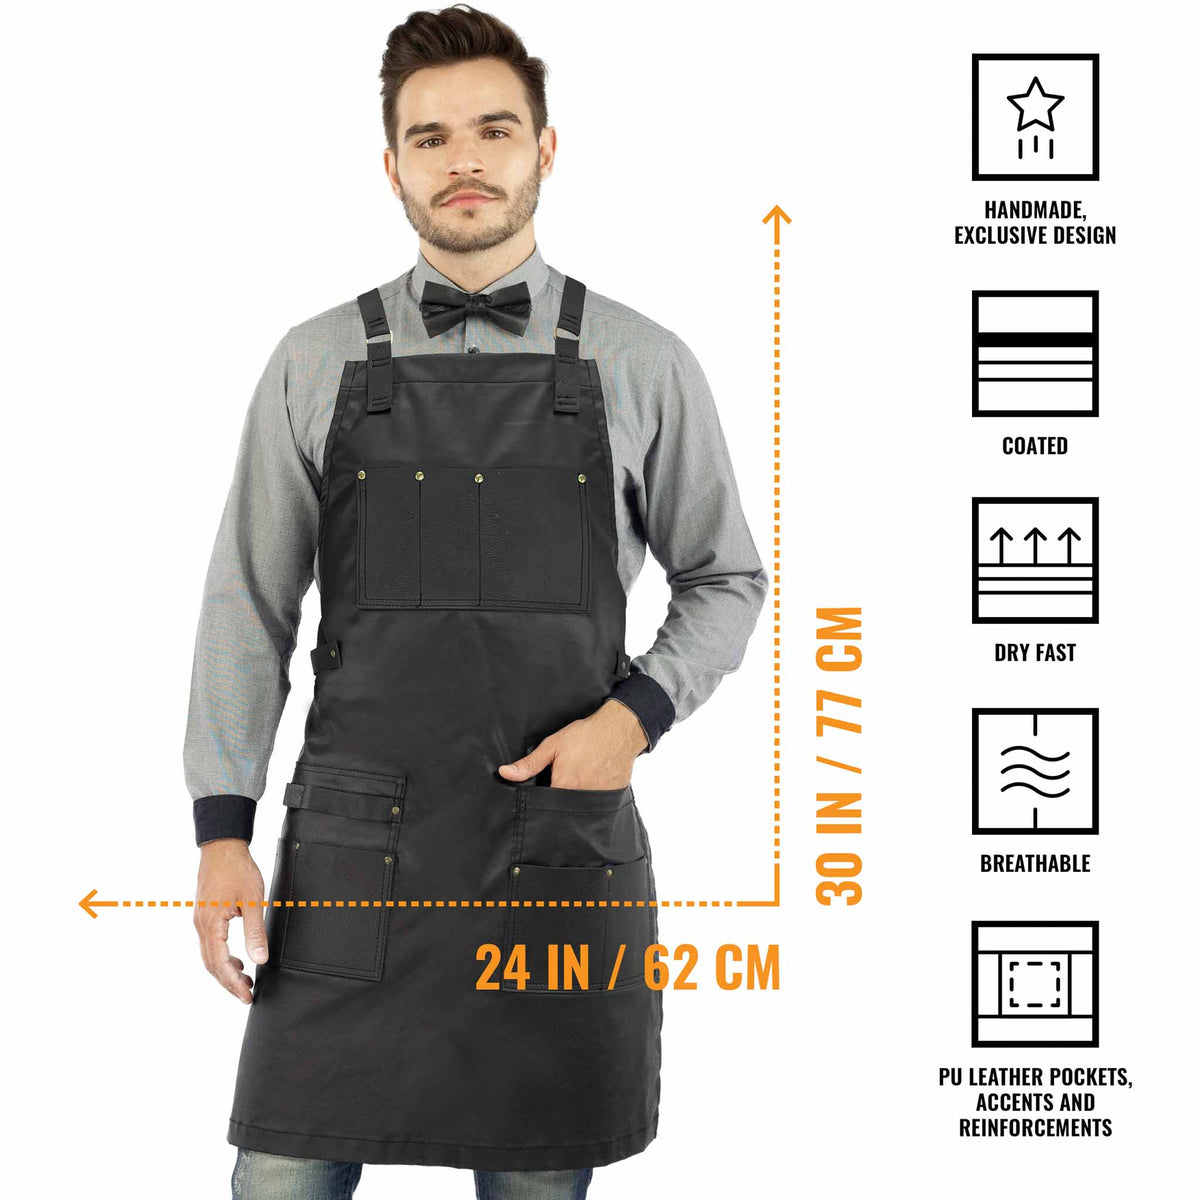 Barber Apron - Leather Straps, Pockets, Loops &amp; Reinforcements - Crossback - Water Resistant - Under NY Sky